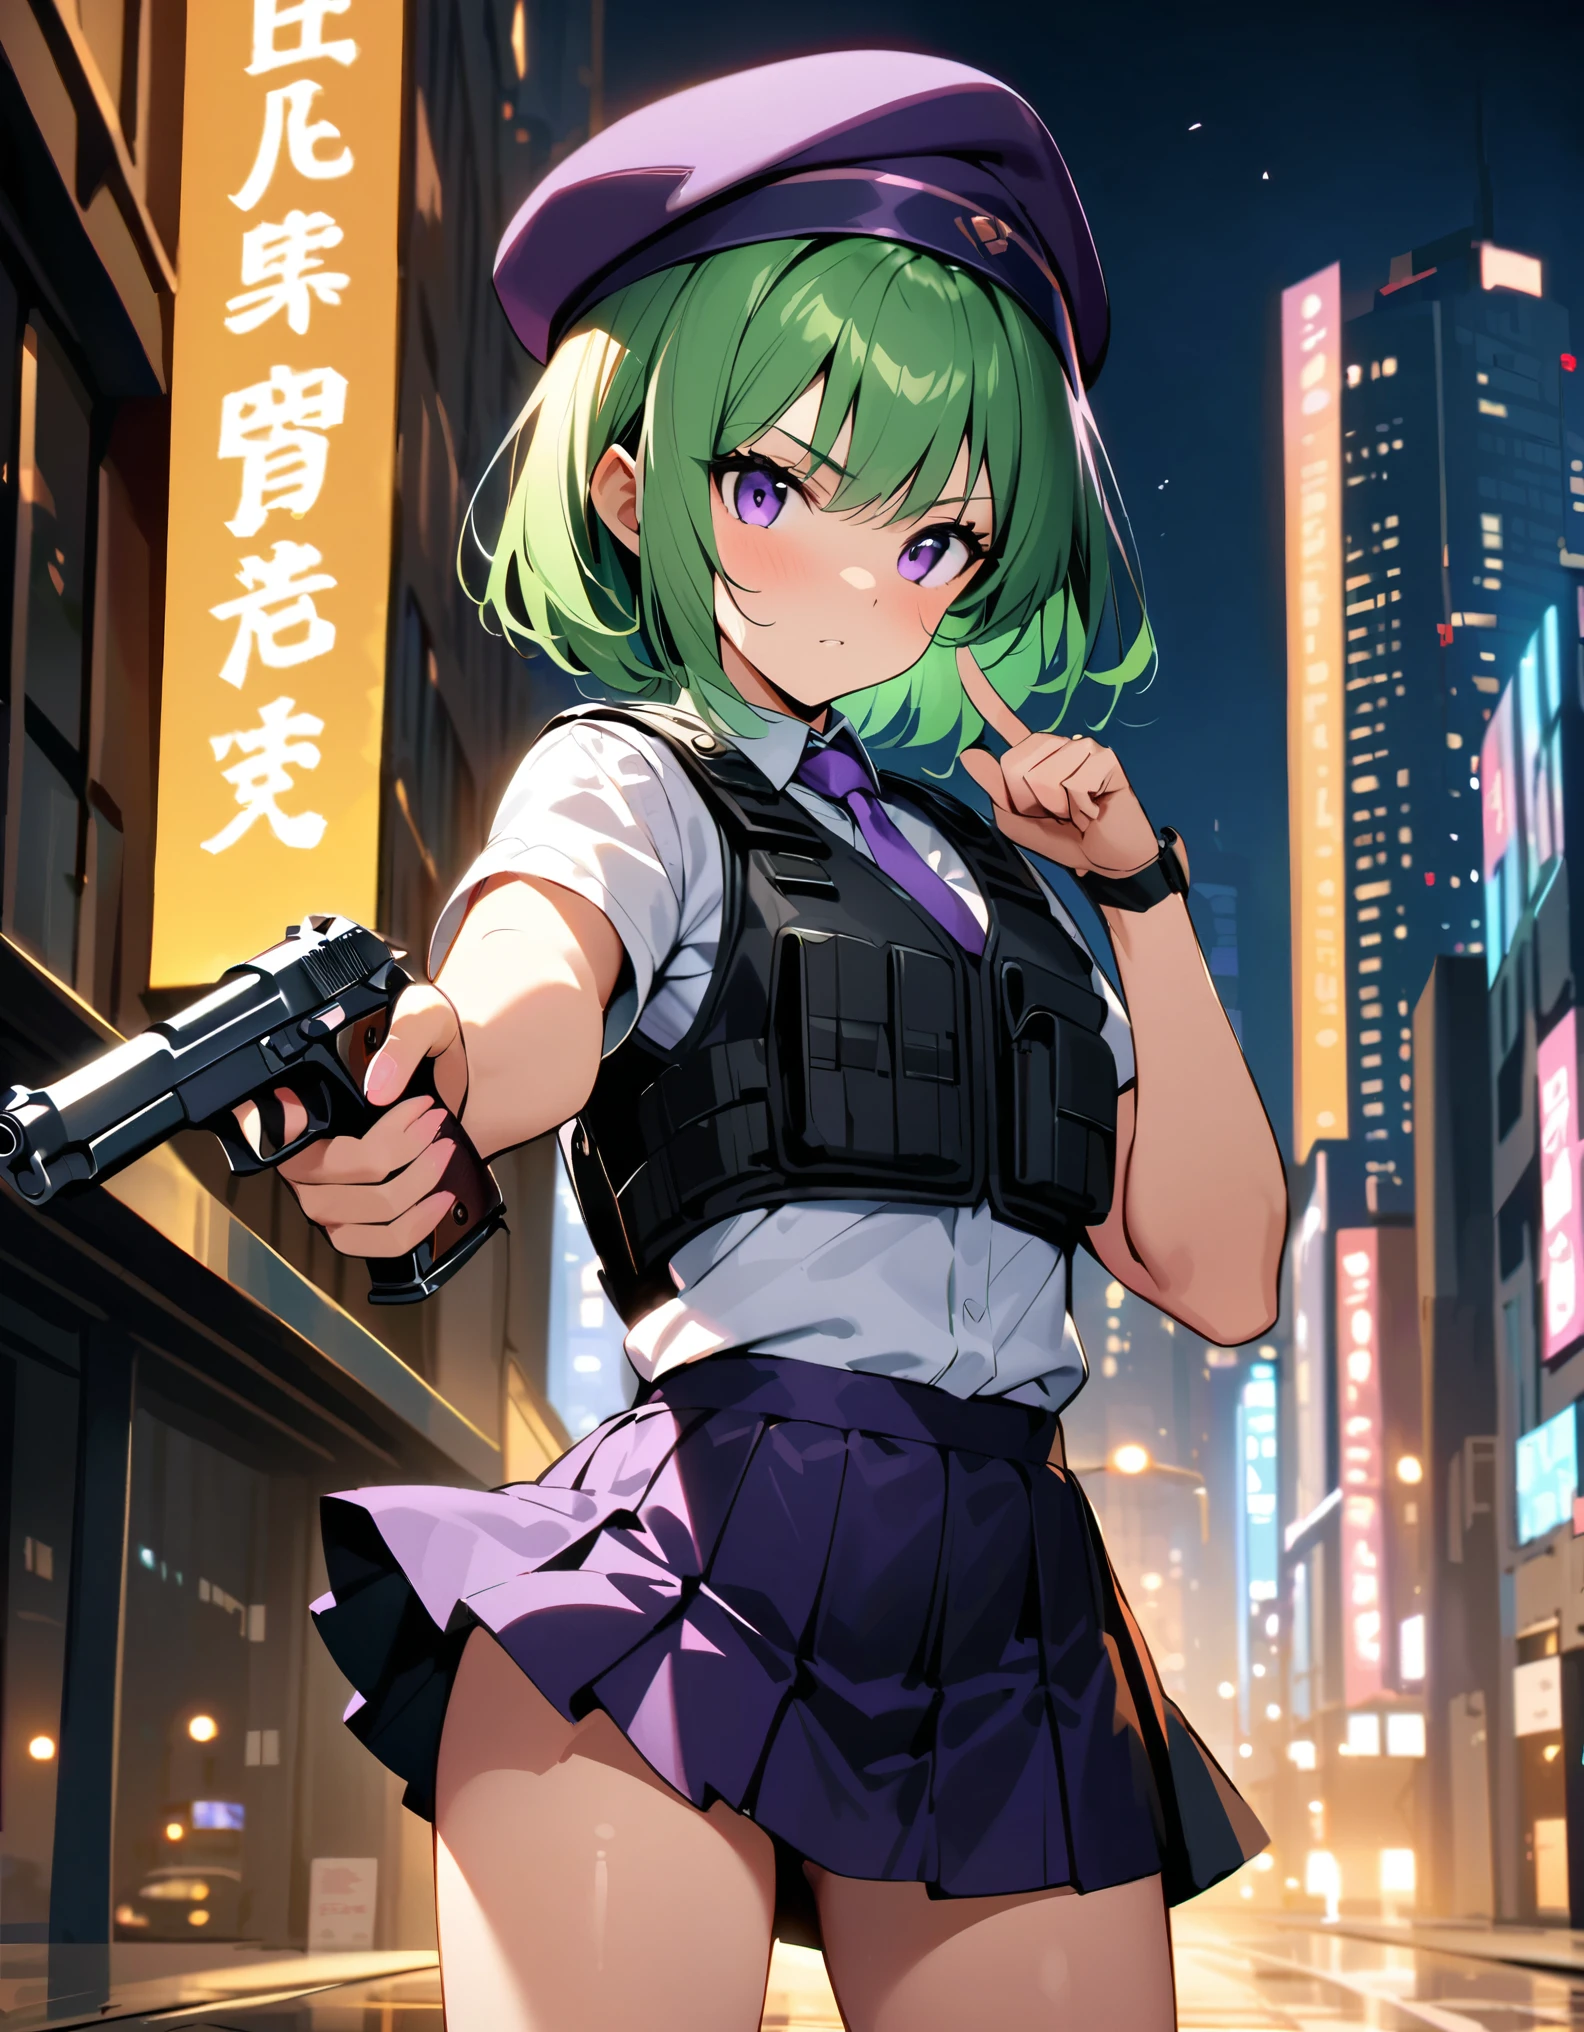 masterpiece, best quality, hires, top-quality、extremely delicate and beautiful、(a teenage girl)、purple eyes、green hair、short-haired、(purple pointy hat)、purple tie、solo、tactical vest、short sleeves. purple skirt, pleated skirt, miniskirt、(holding a pistol in her right hand, (beretta 92f))、((pointing the gun to the front)). city backdrop, night, noir atmosphere. cowboy shot.